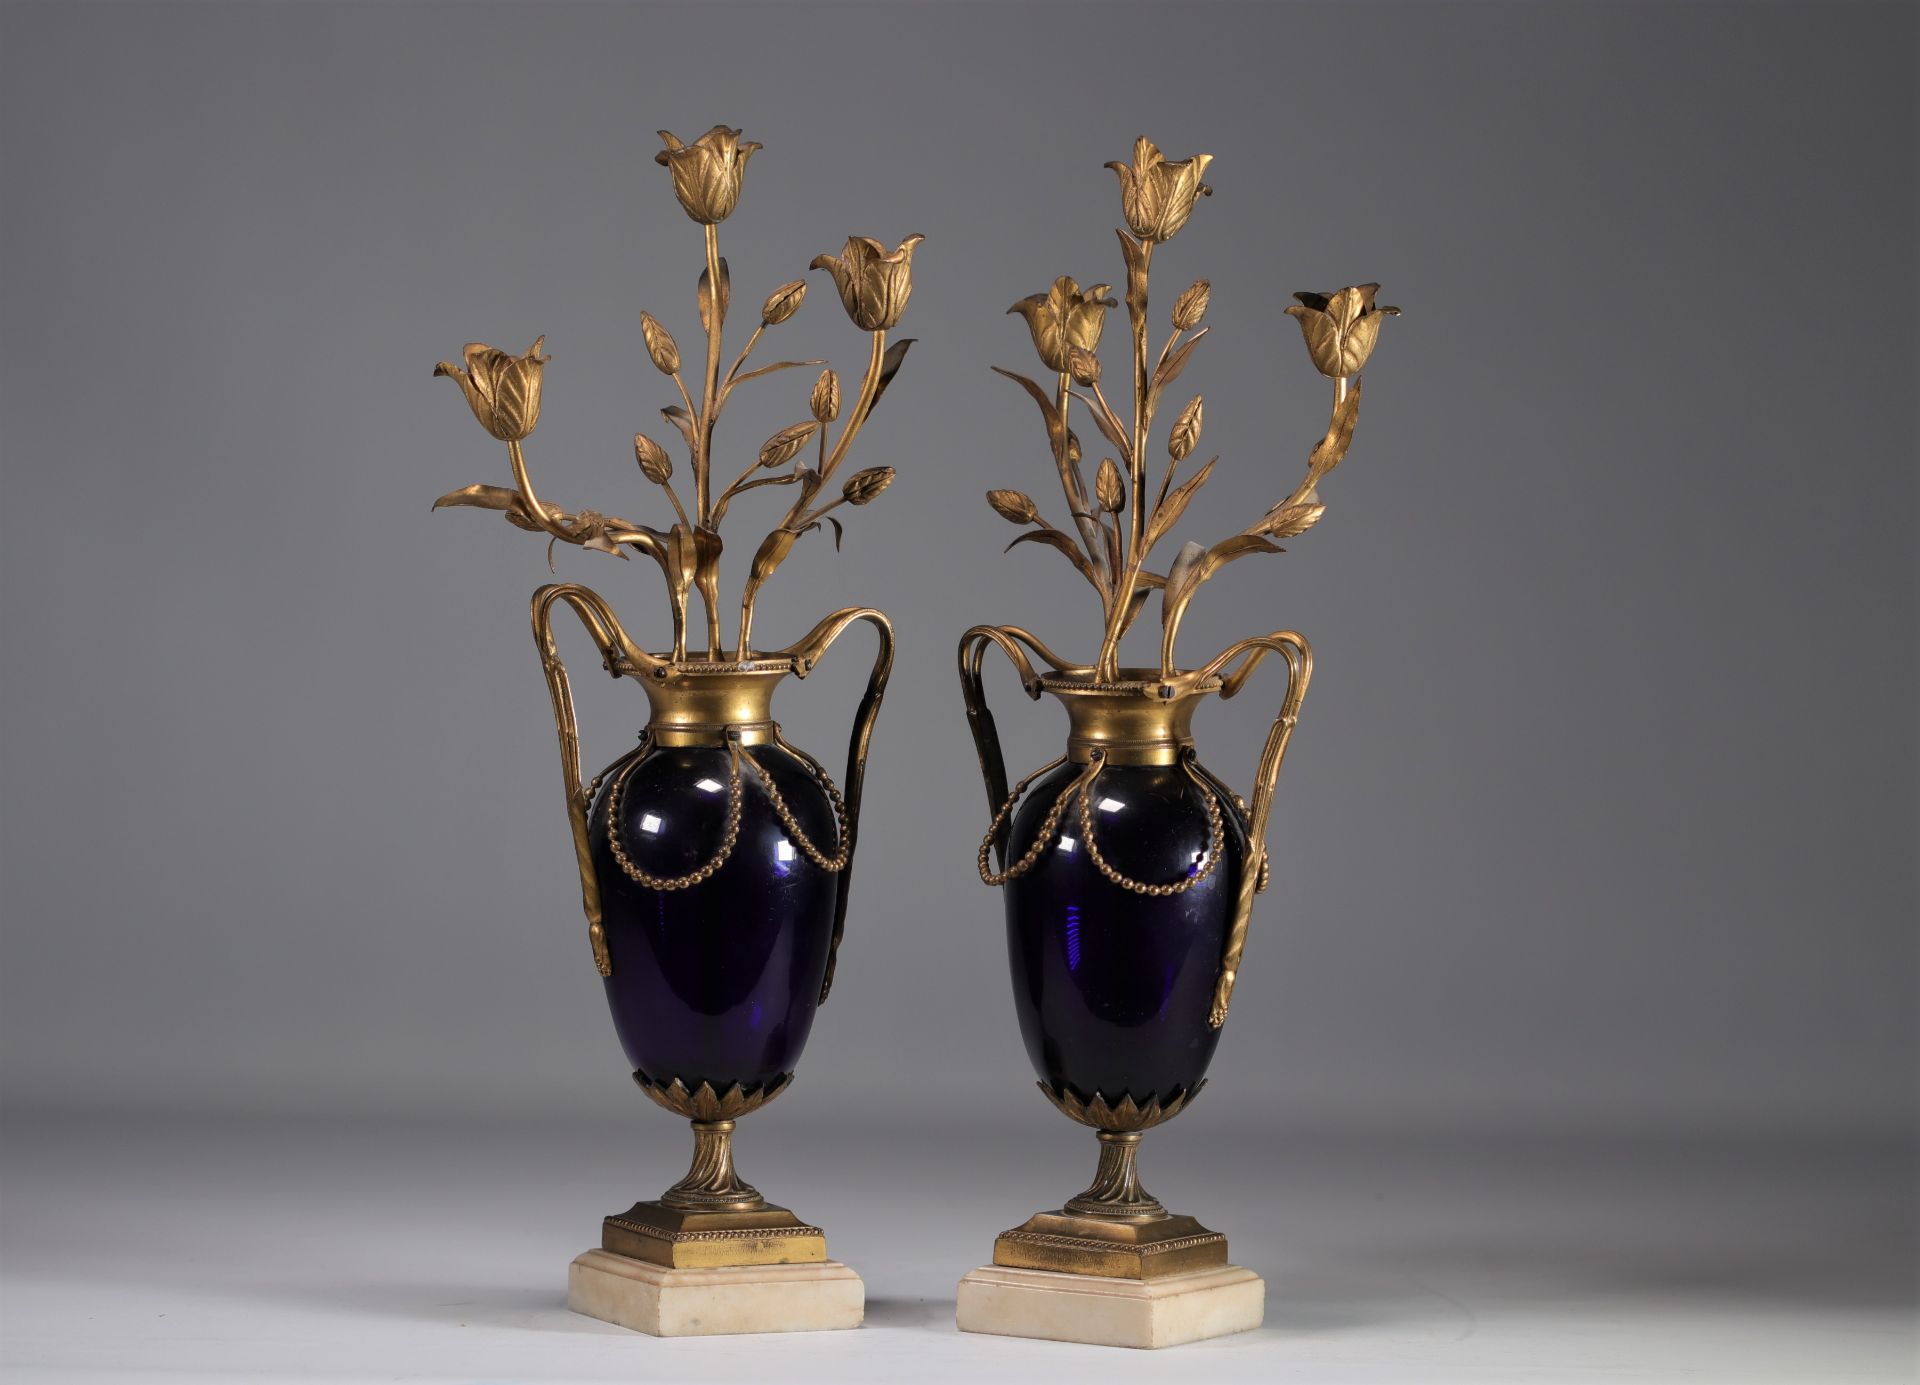 Pair of "candelabra" vases in Le Creusot blue glass and bronze, Louis XVI period